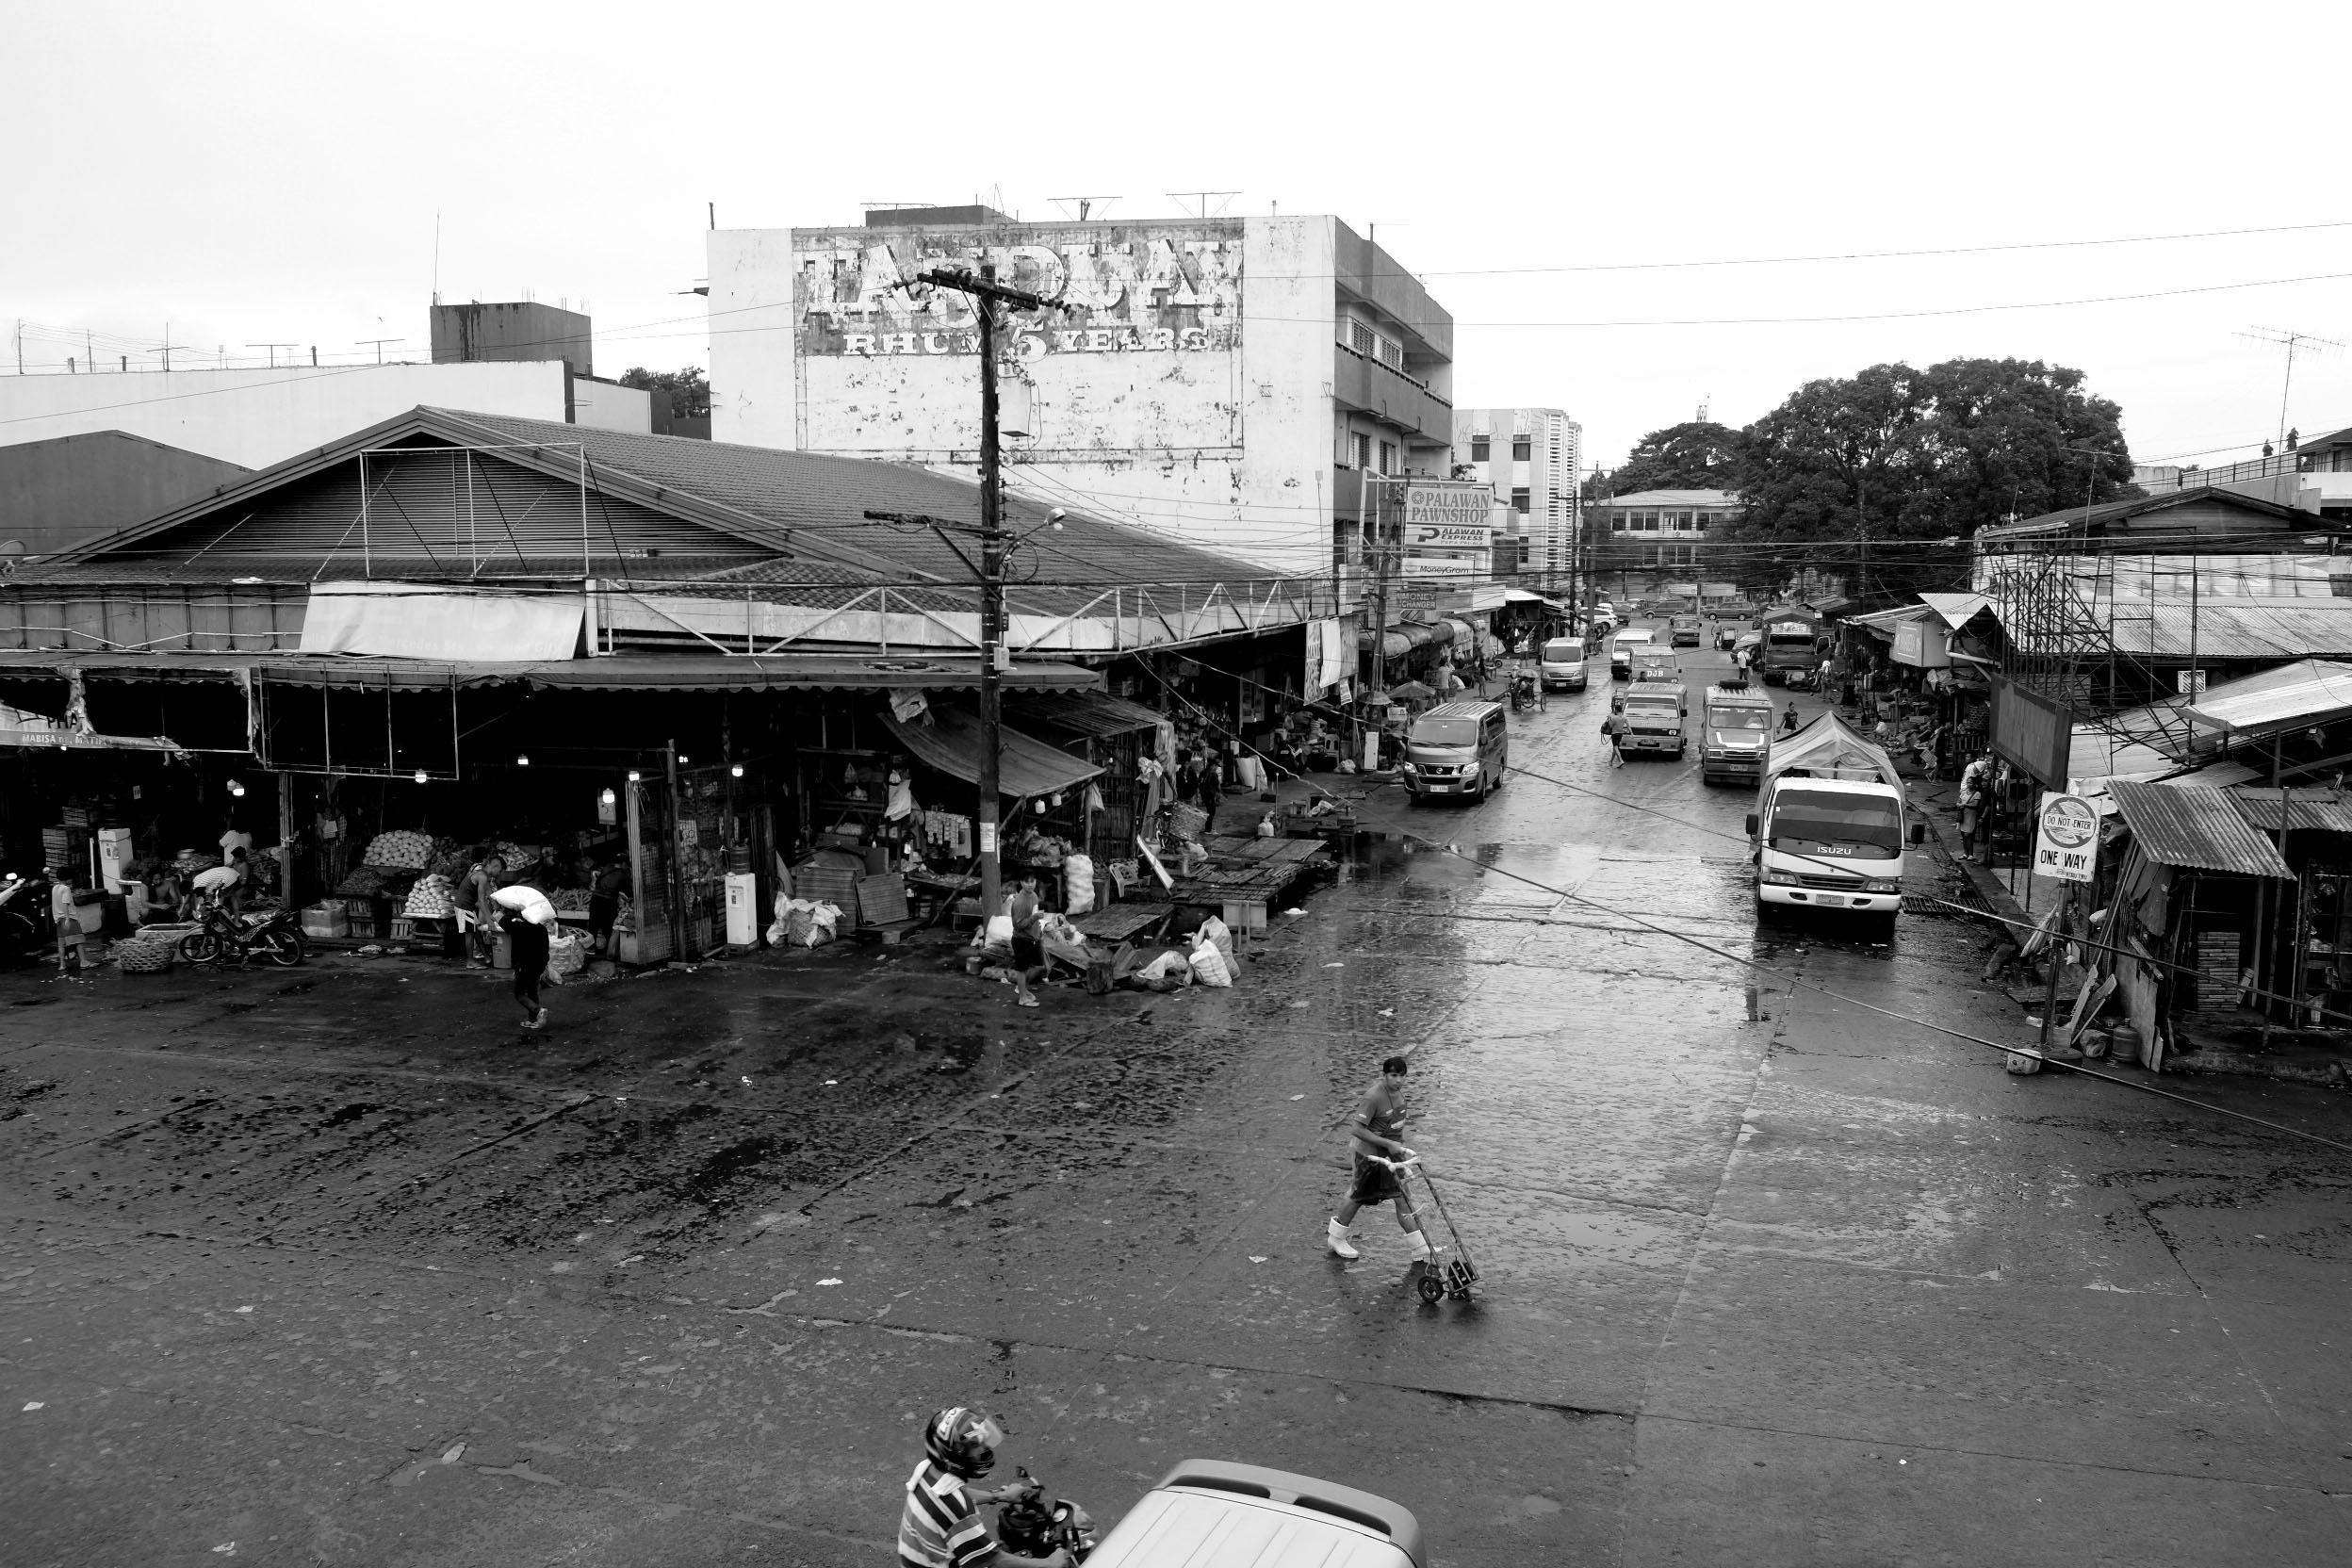 BACOLOD has three major wet and dry public markets - South or Libertad, North or Burgos, and Central - through which 12 streets pass through - Burgos, Galo, Daniel Ramos, Gonzaga, Luzuriaga, San Juan, Libertad or Hernaez, Amelia, Lopez Jaena, and Mabini. This is the juncture of Amelia and Lopez Jaena Streets, the southern spine of the Libertad Public Market. The portion of Amelia you can see used to be passable to only one vehicle as it was choked by vendors lining both sides of the road. |Photo by Lourdes Rae Antenor, text by Julius D. Mariveles